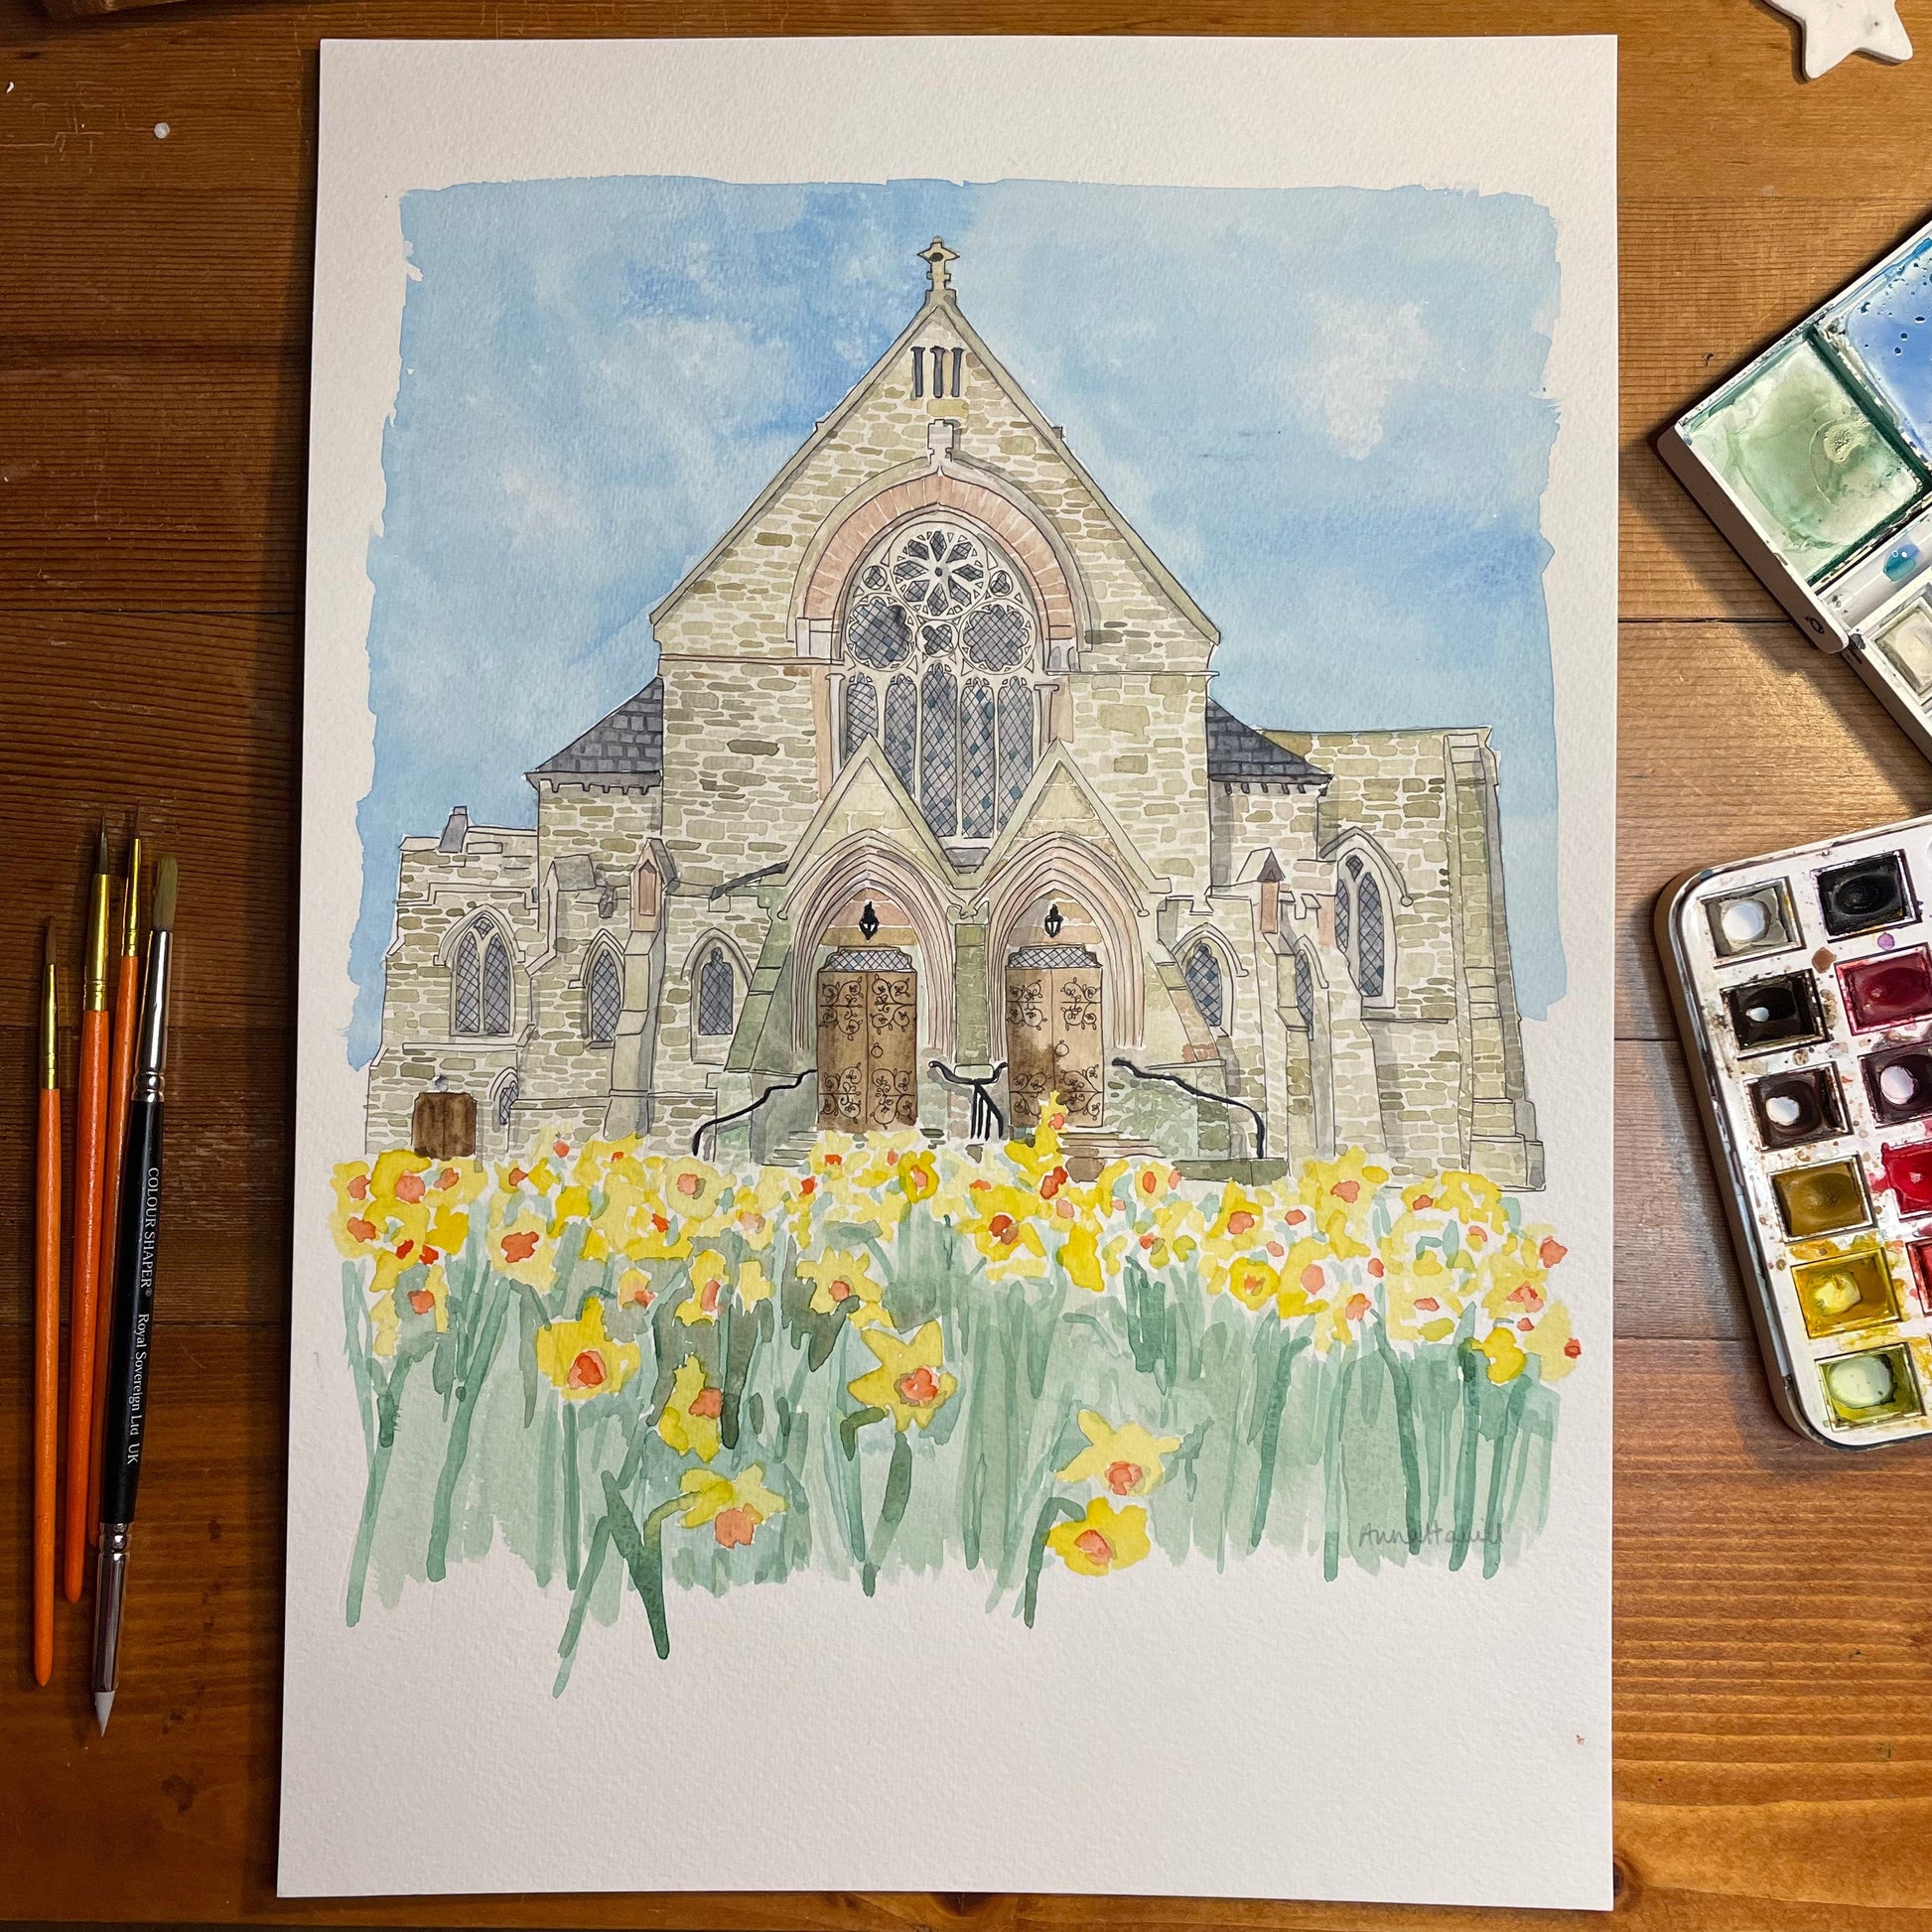 And Hope Designs Commission Custom Watercolour church or wedding venue painting